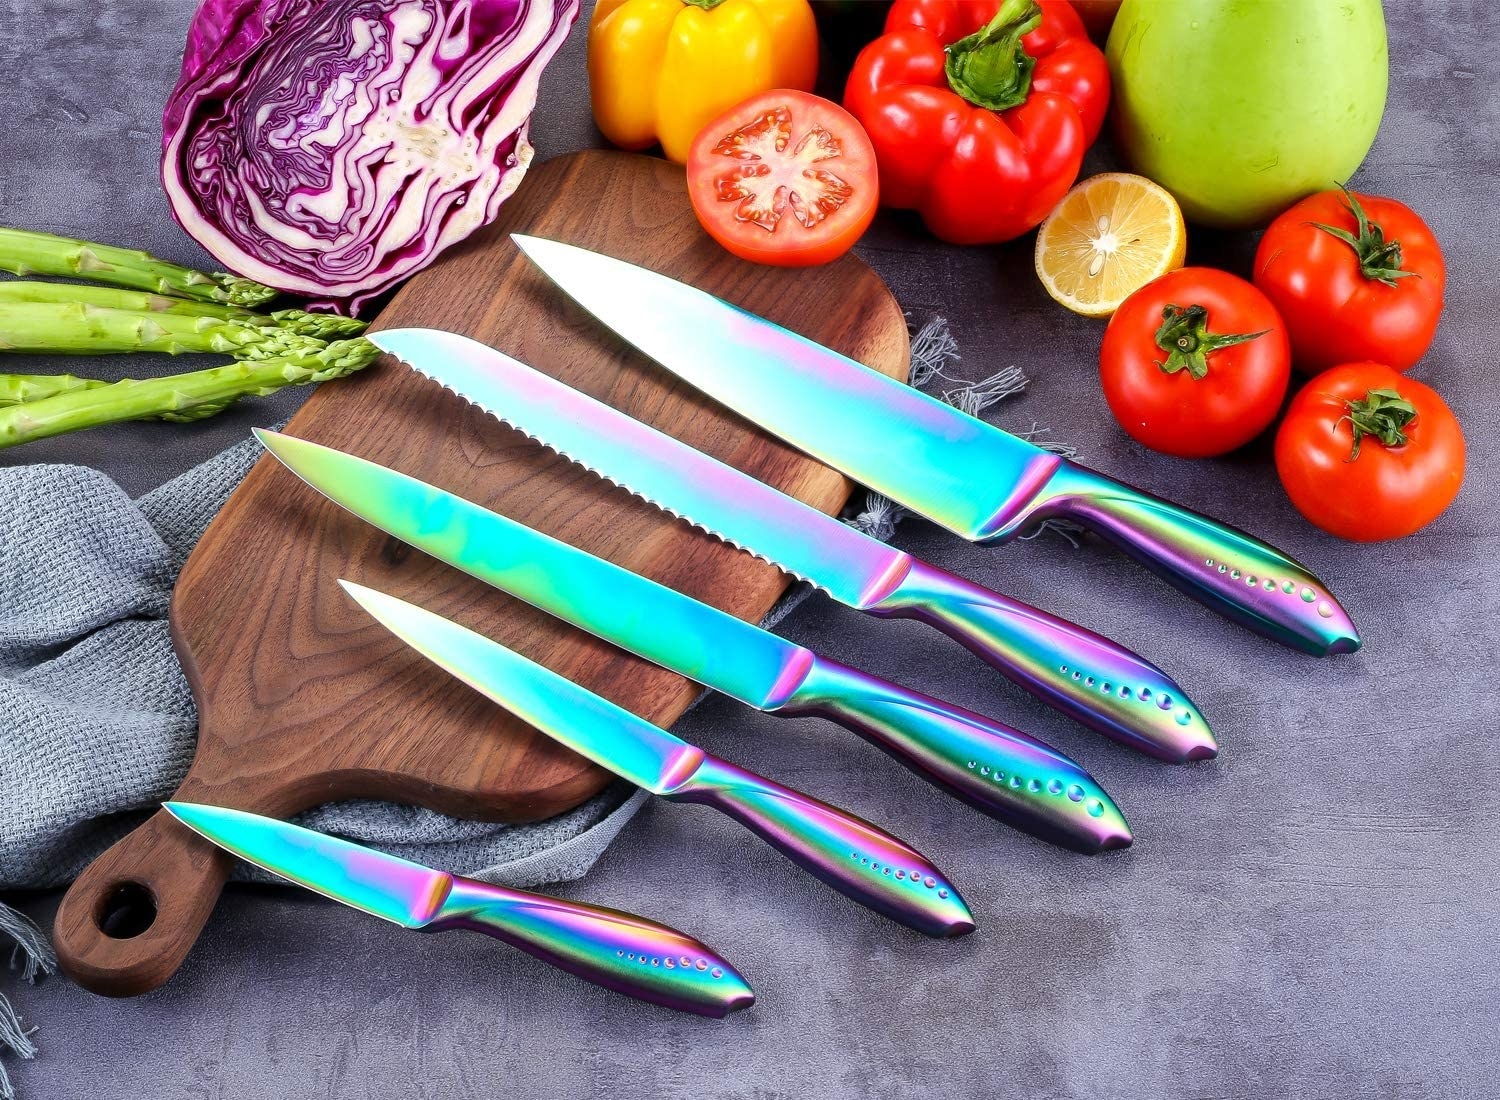 a set of rainbow kitchen knives next to fresh fruits and veggies